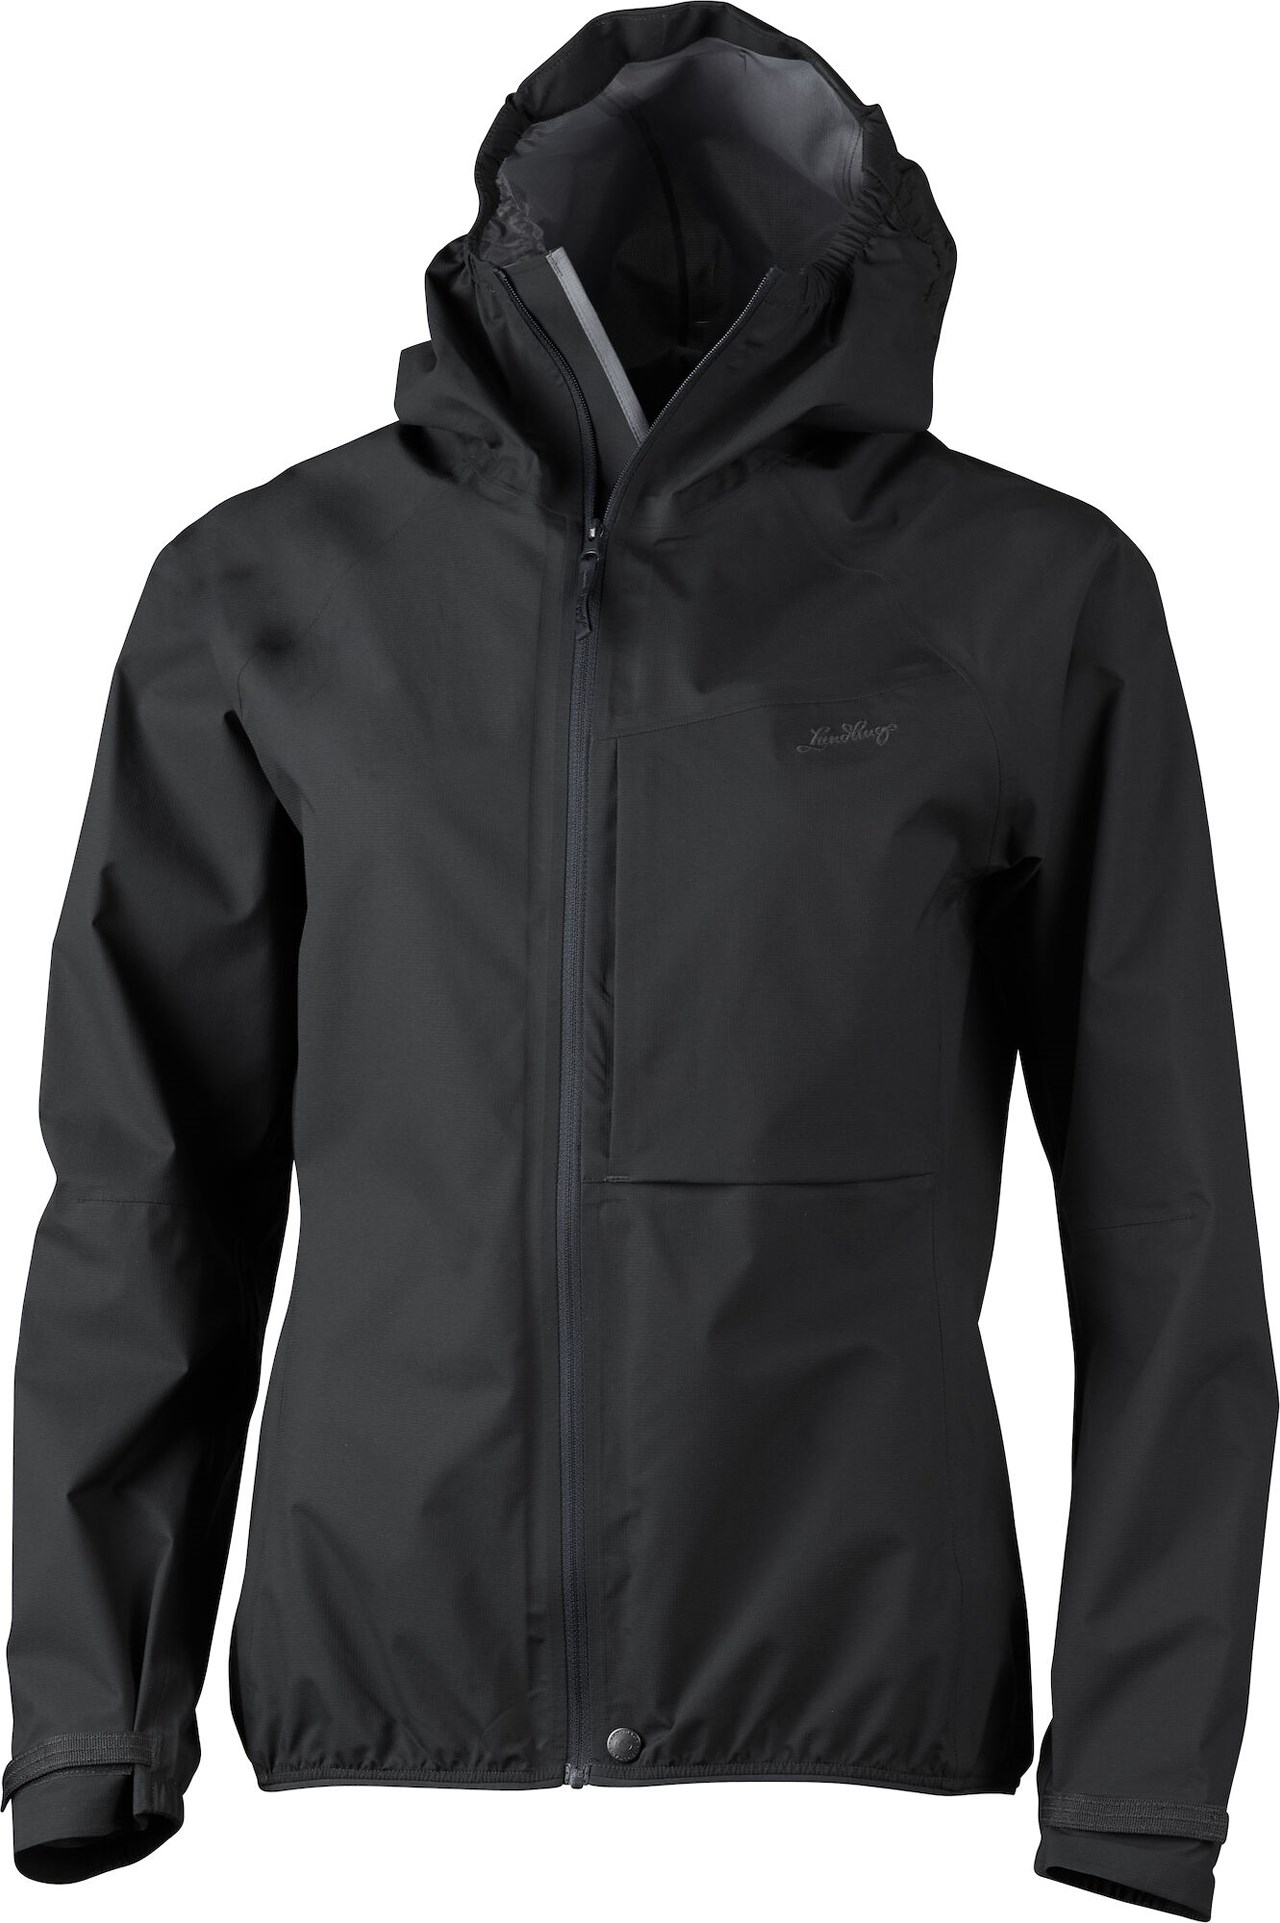 Lundhags "Lo Ws Jacket" - charcoal